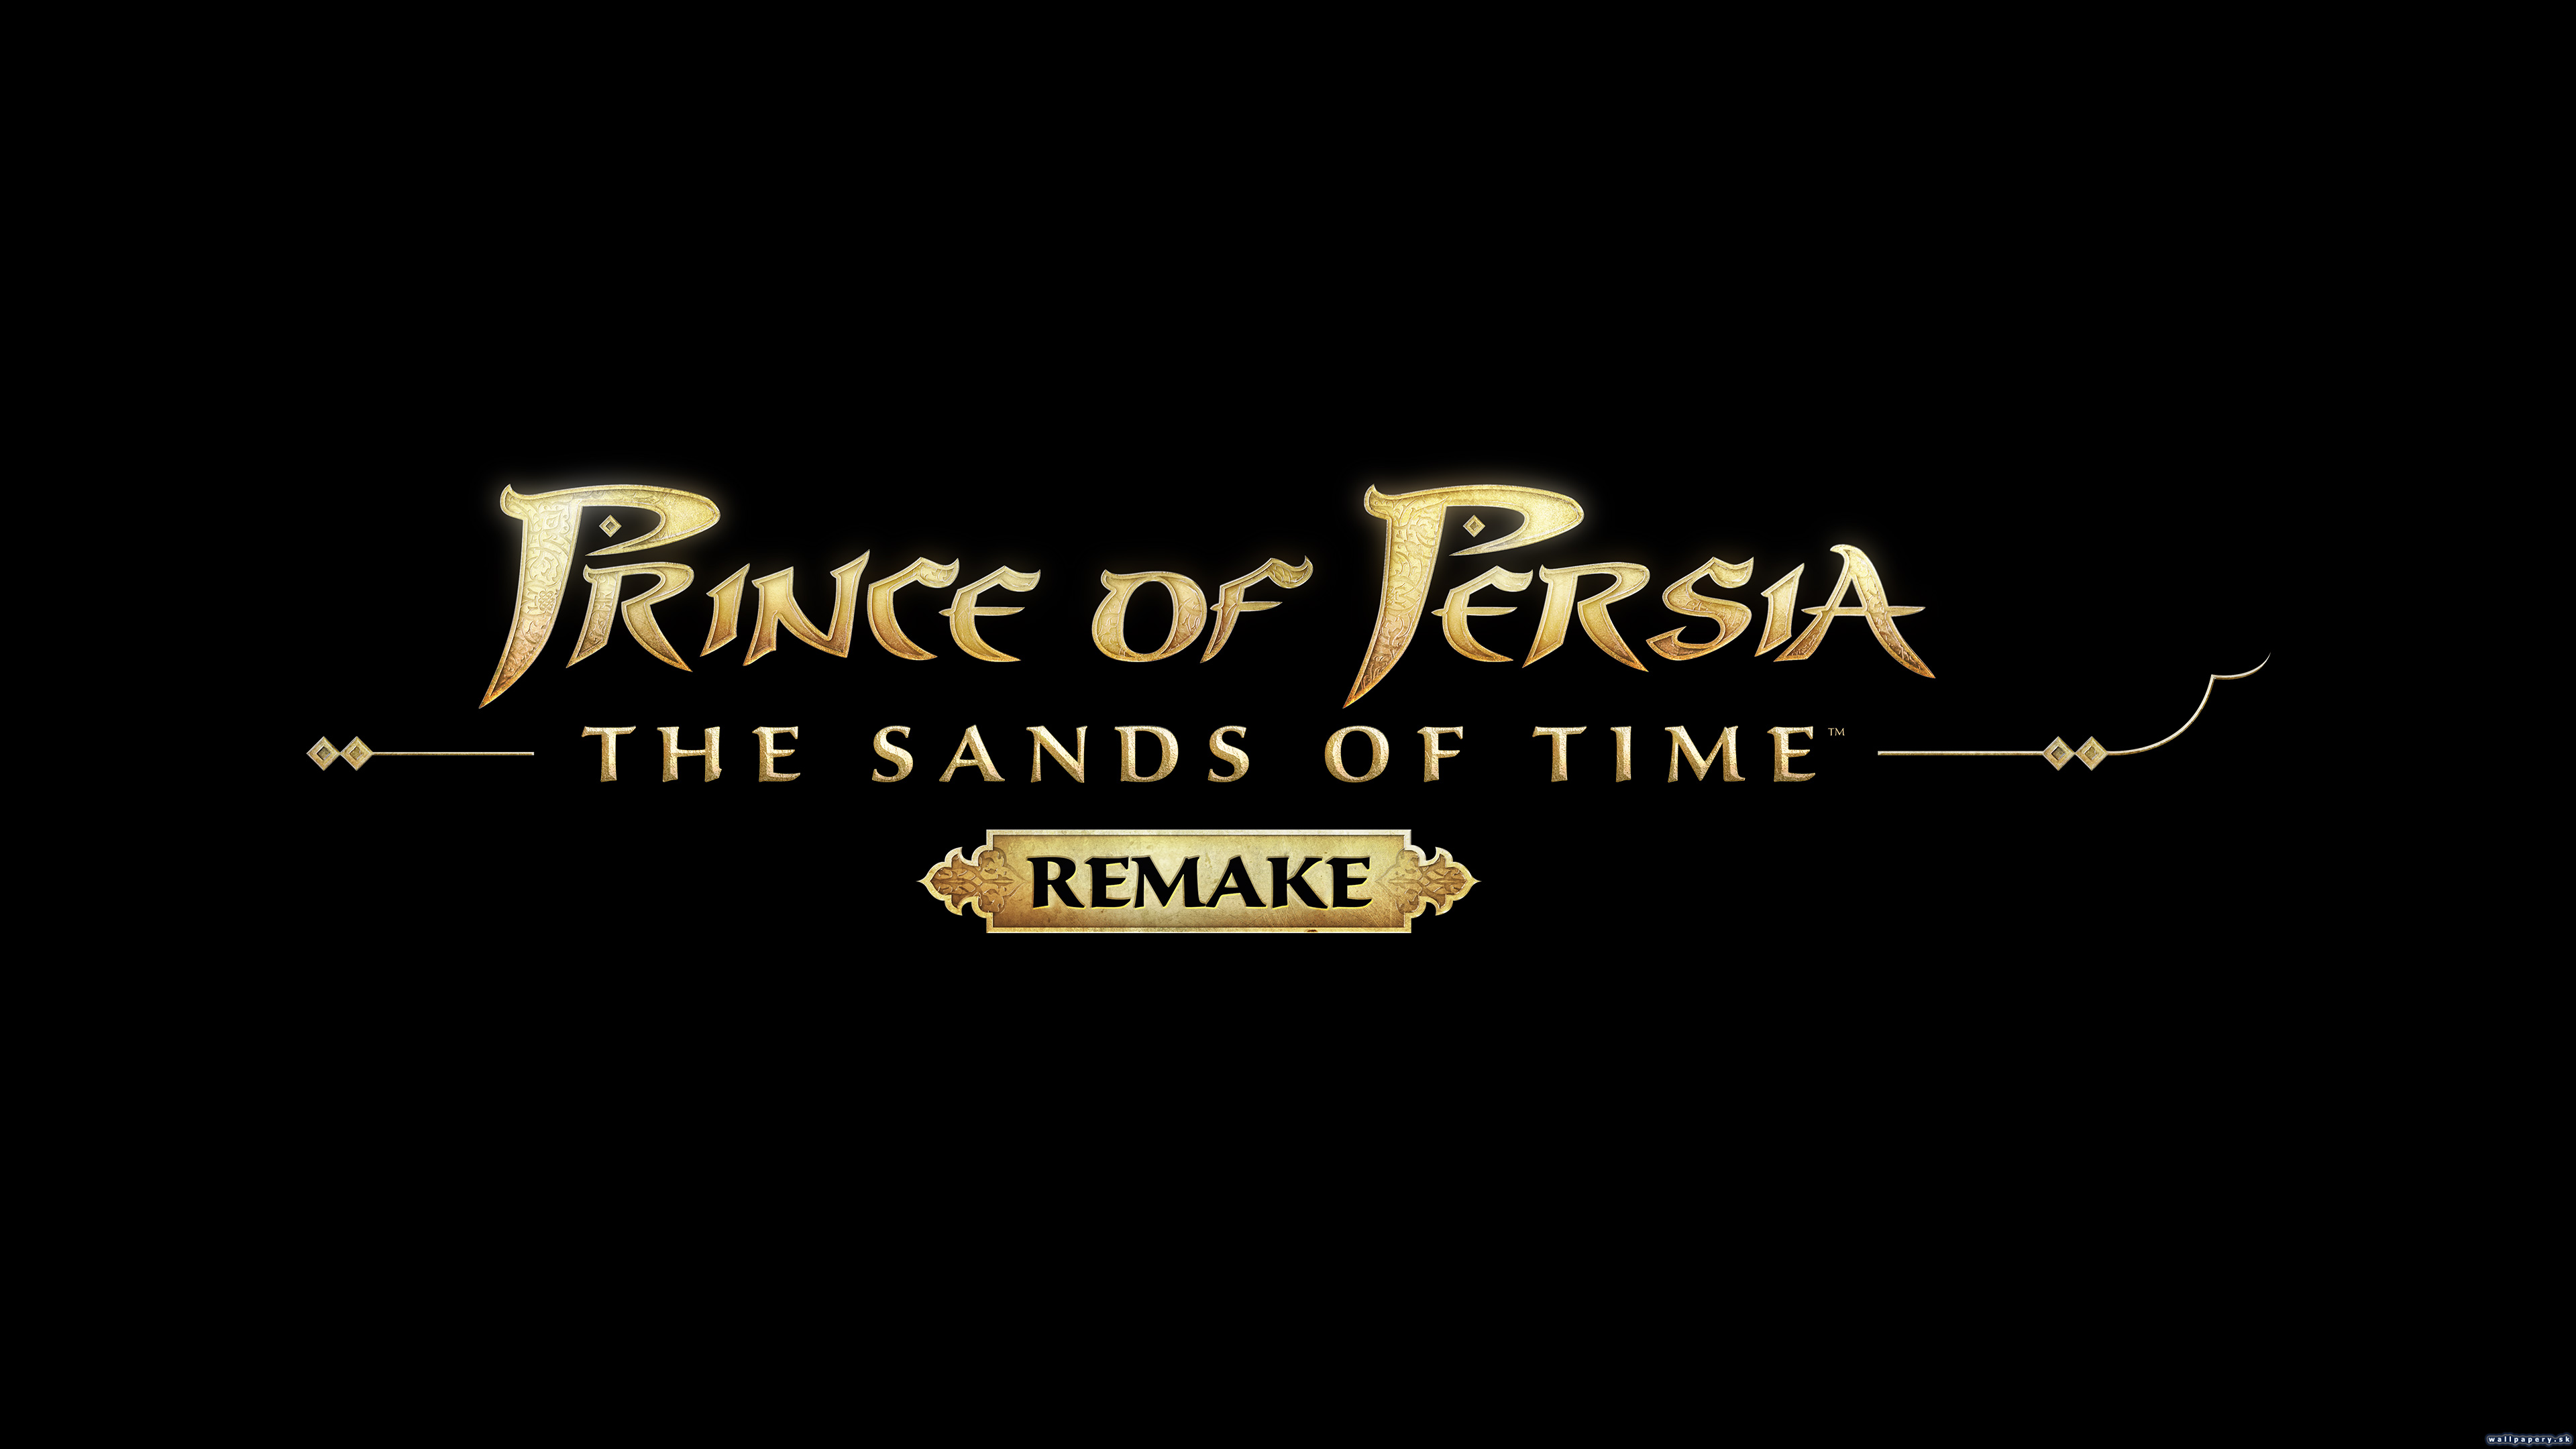 Prince of Persia: The Sands of Time Remake - wallpaper 3